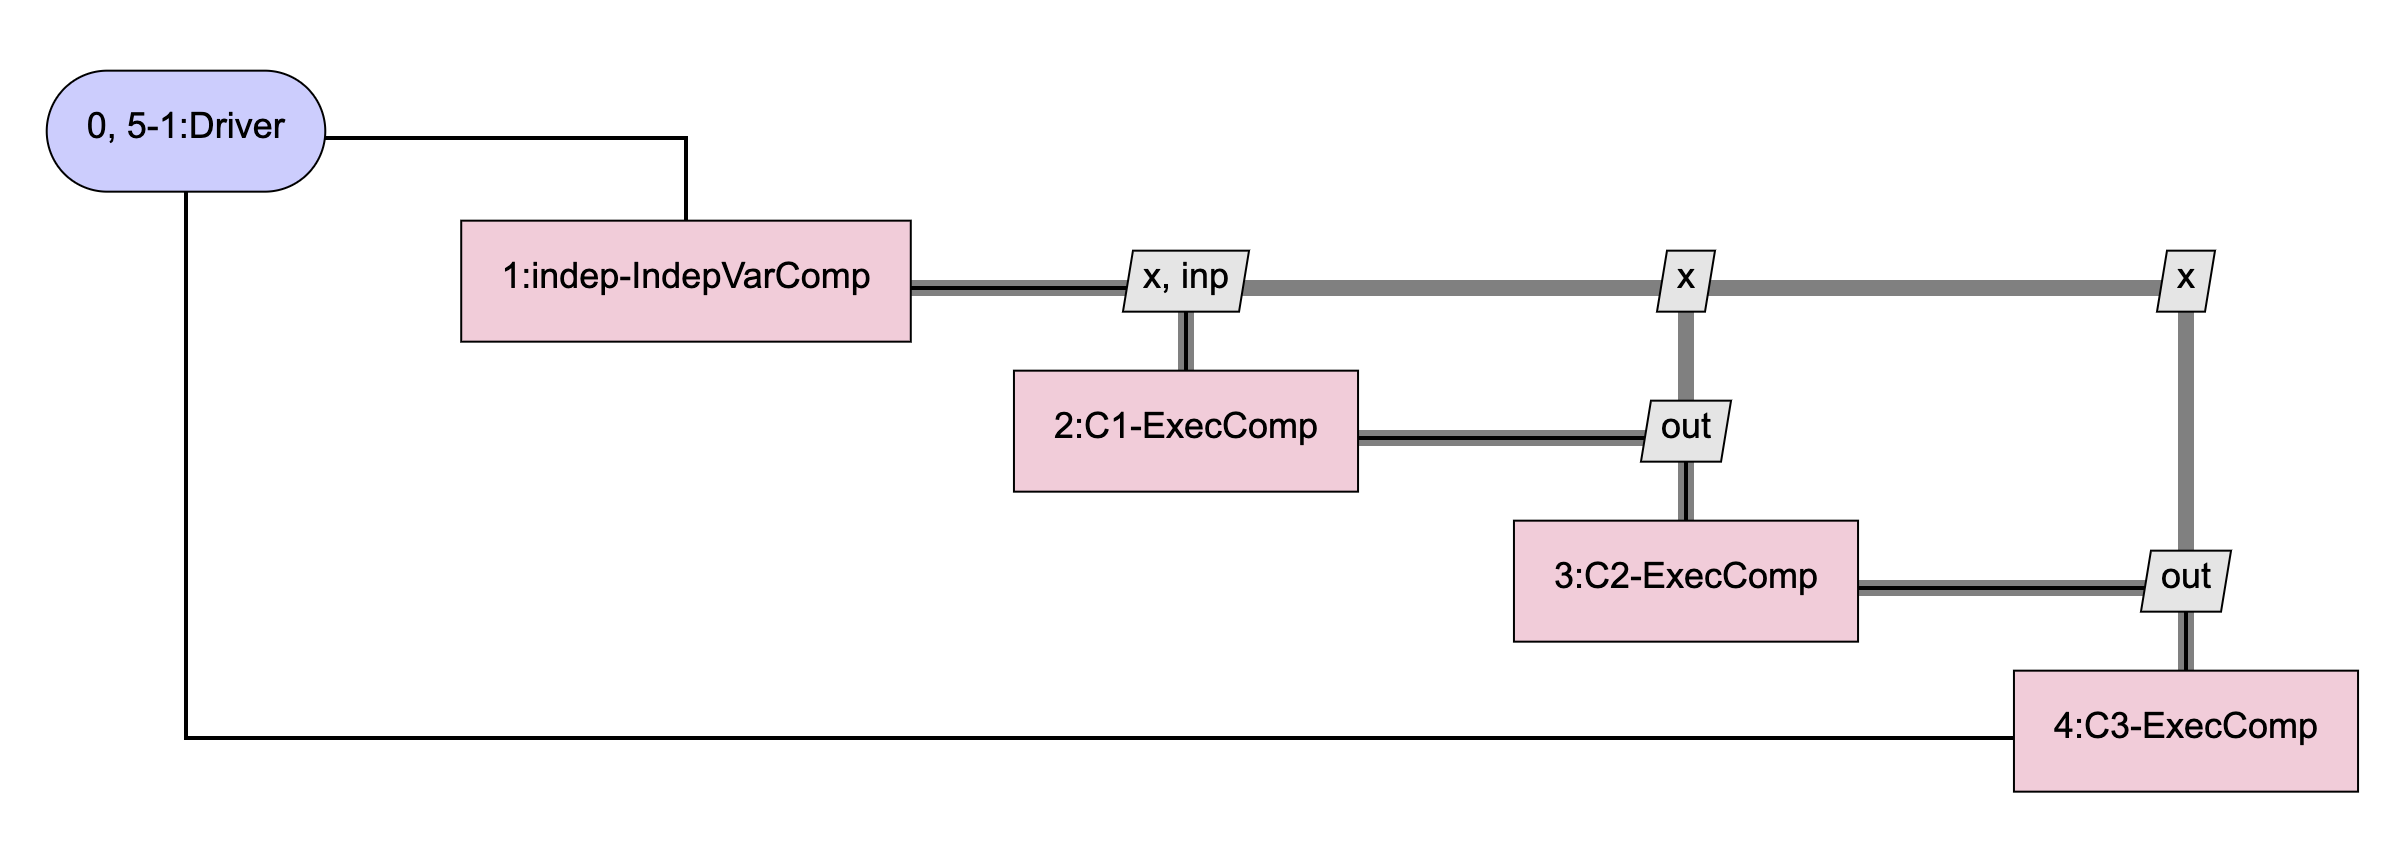 Model using 3 ExecComps